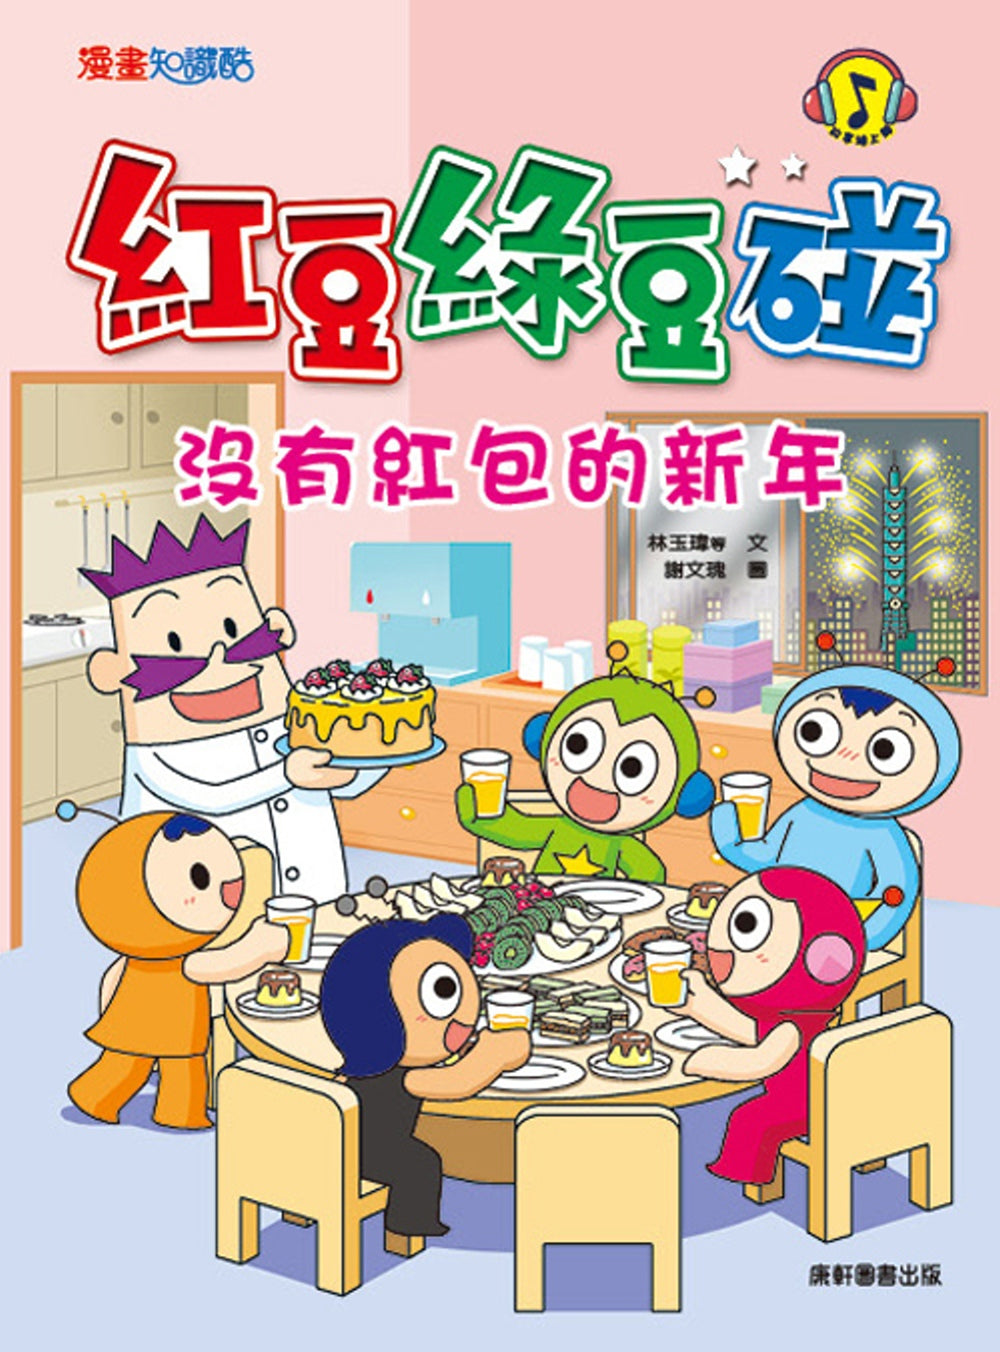 Red Bean Green Bean Manga #7: The New Year Without Red Pockets • 紅豆綠豆碰 #7：沒有紅包的新年